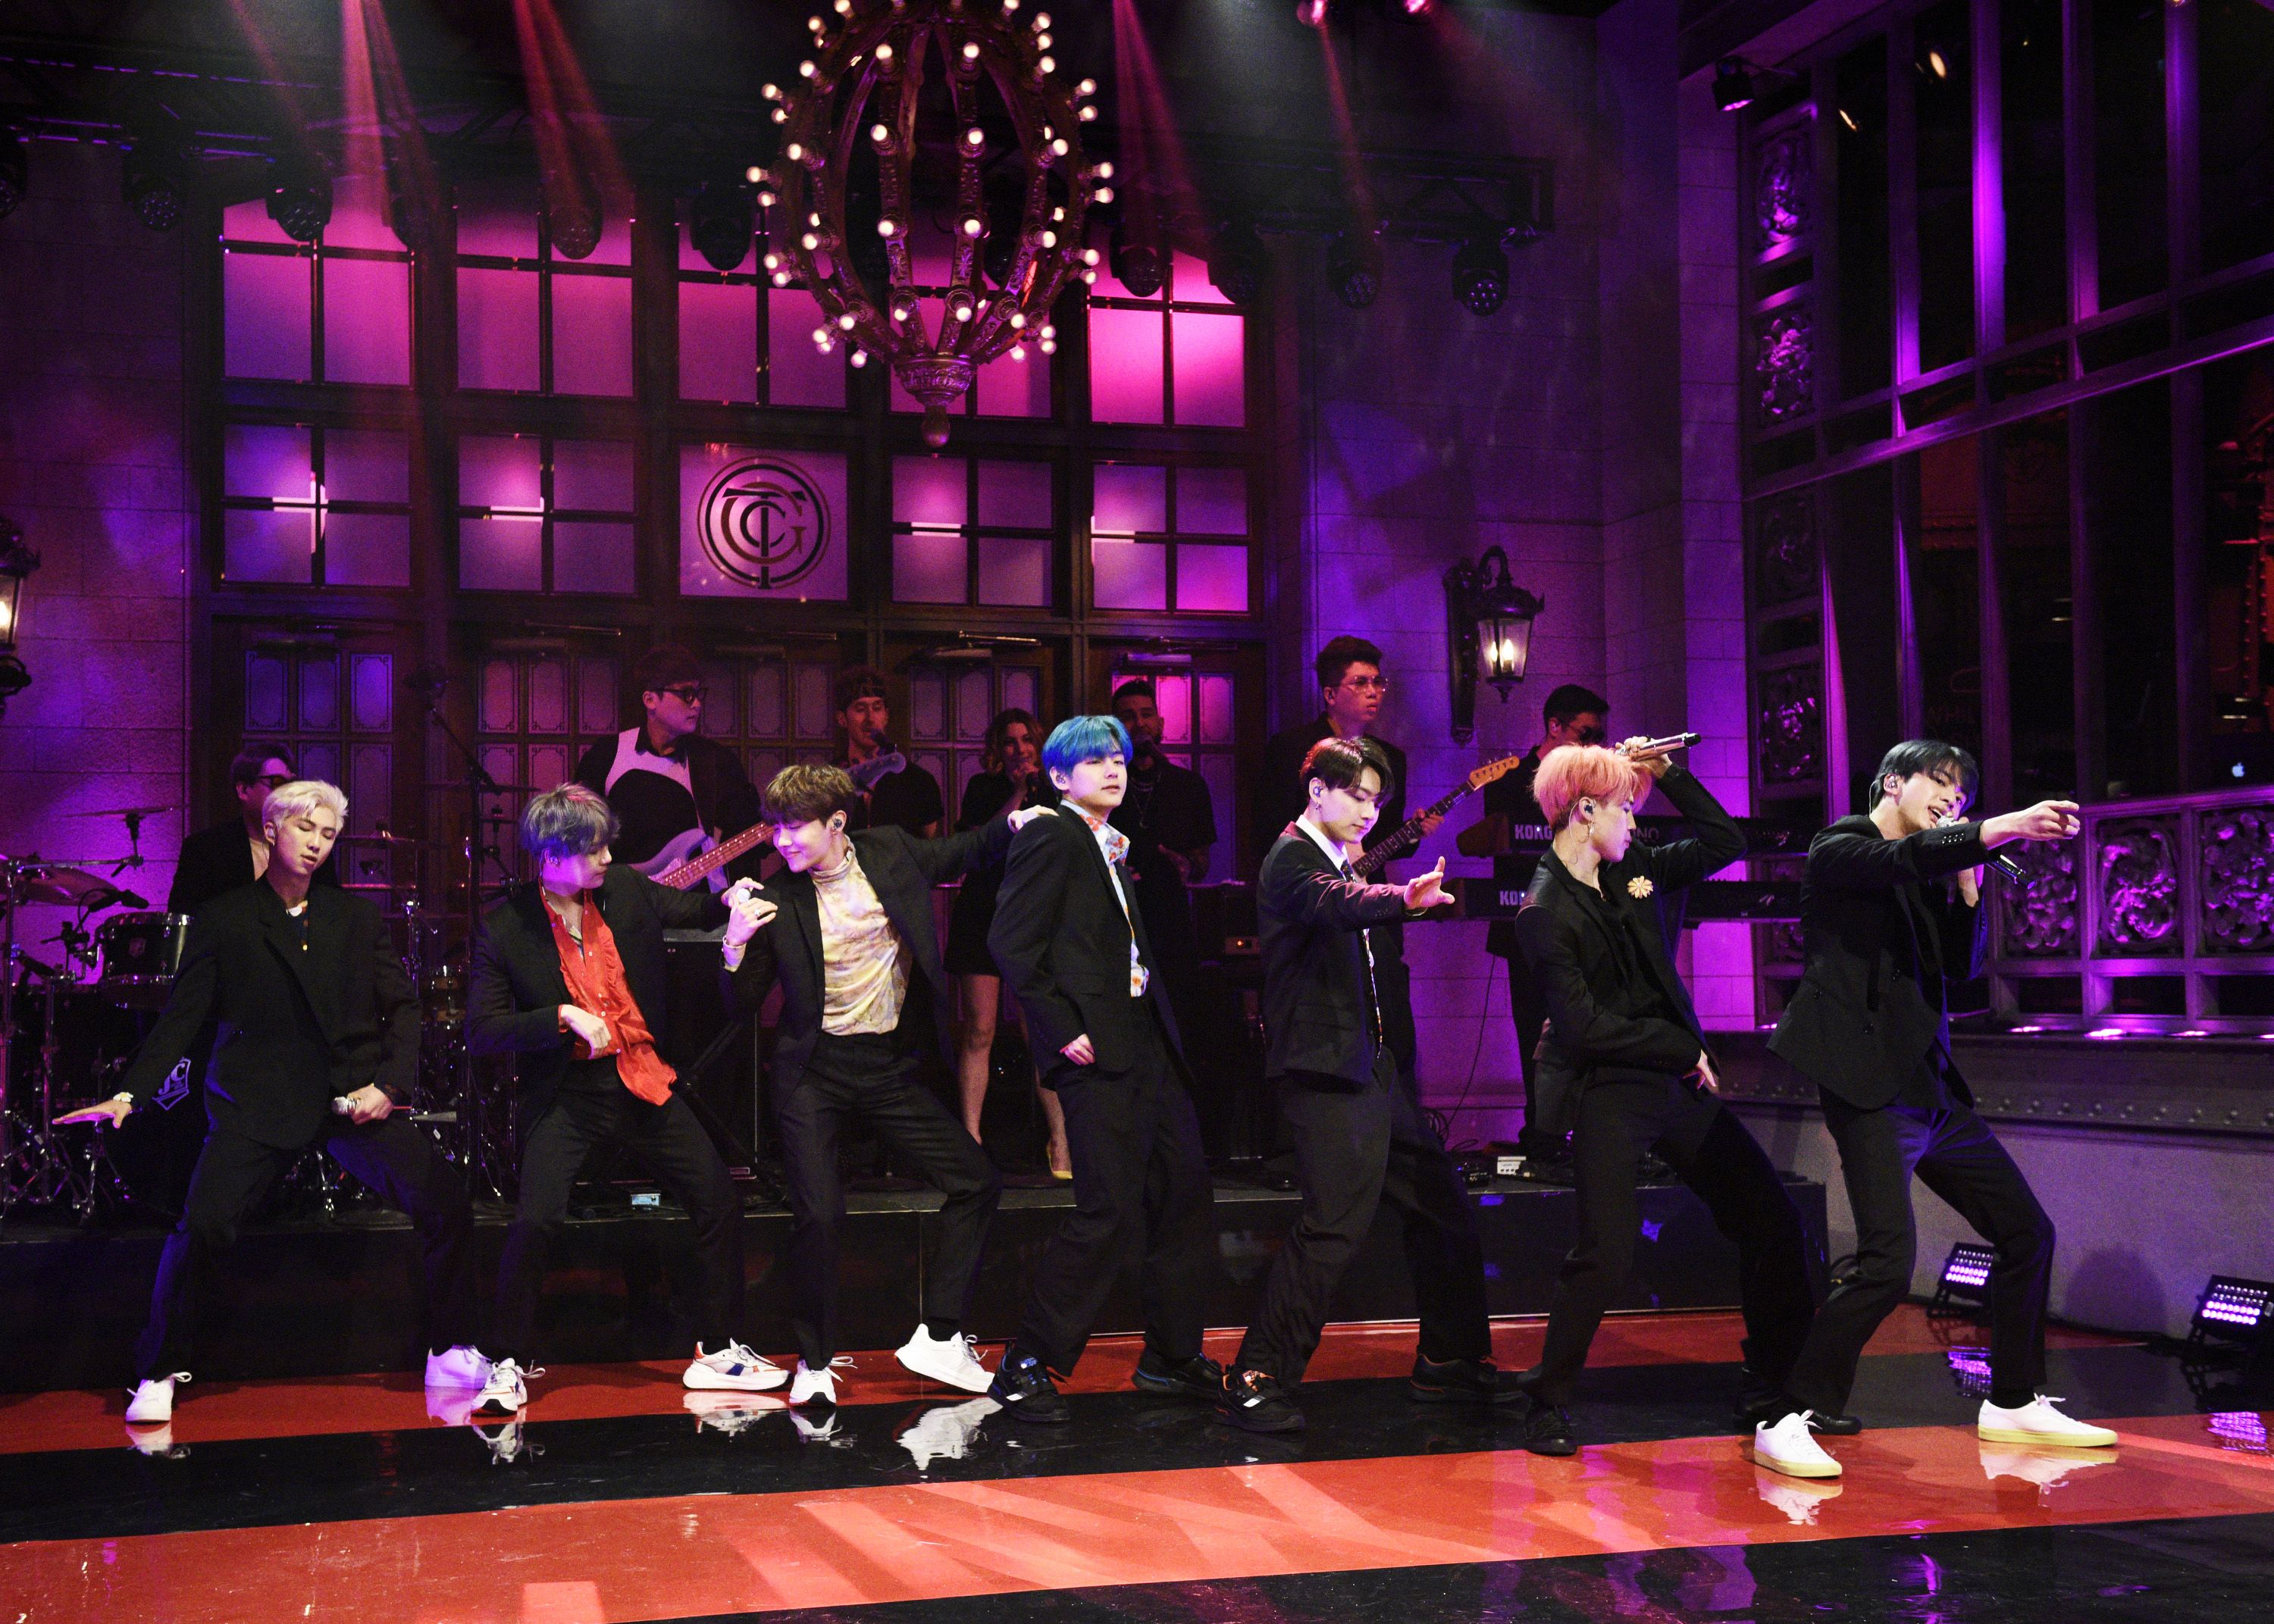 BTS Brought Some Next-Level Style to the SNL Stage